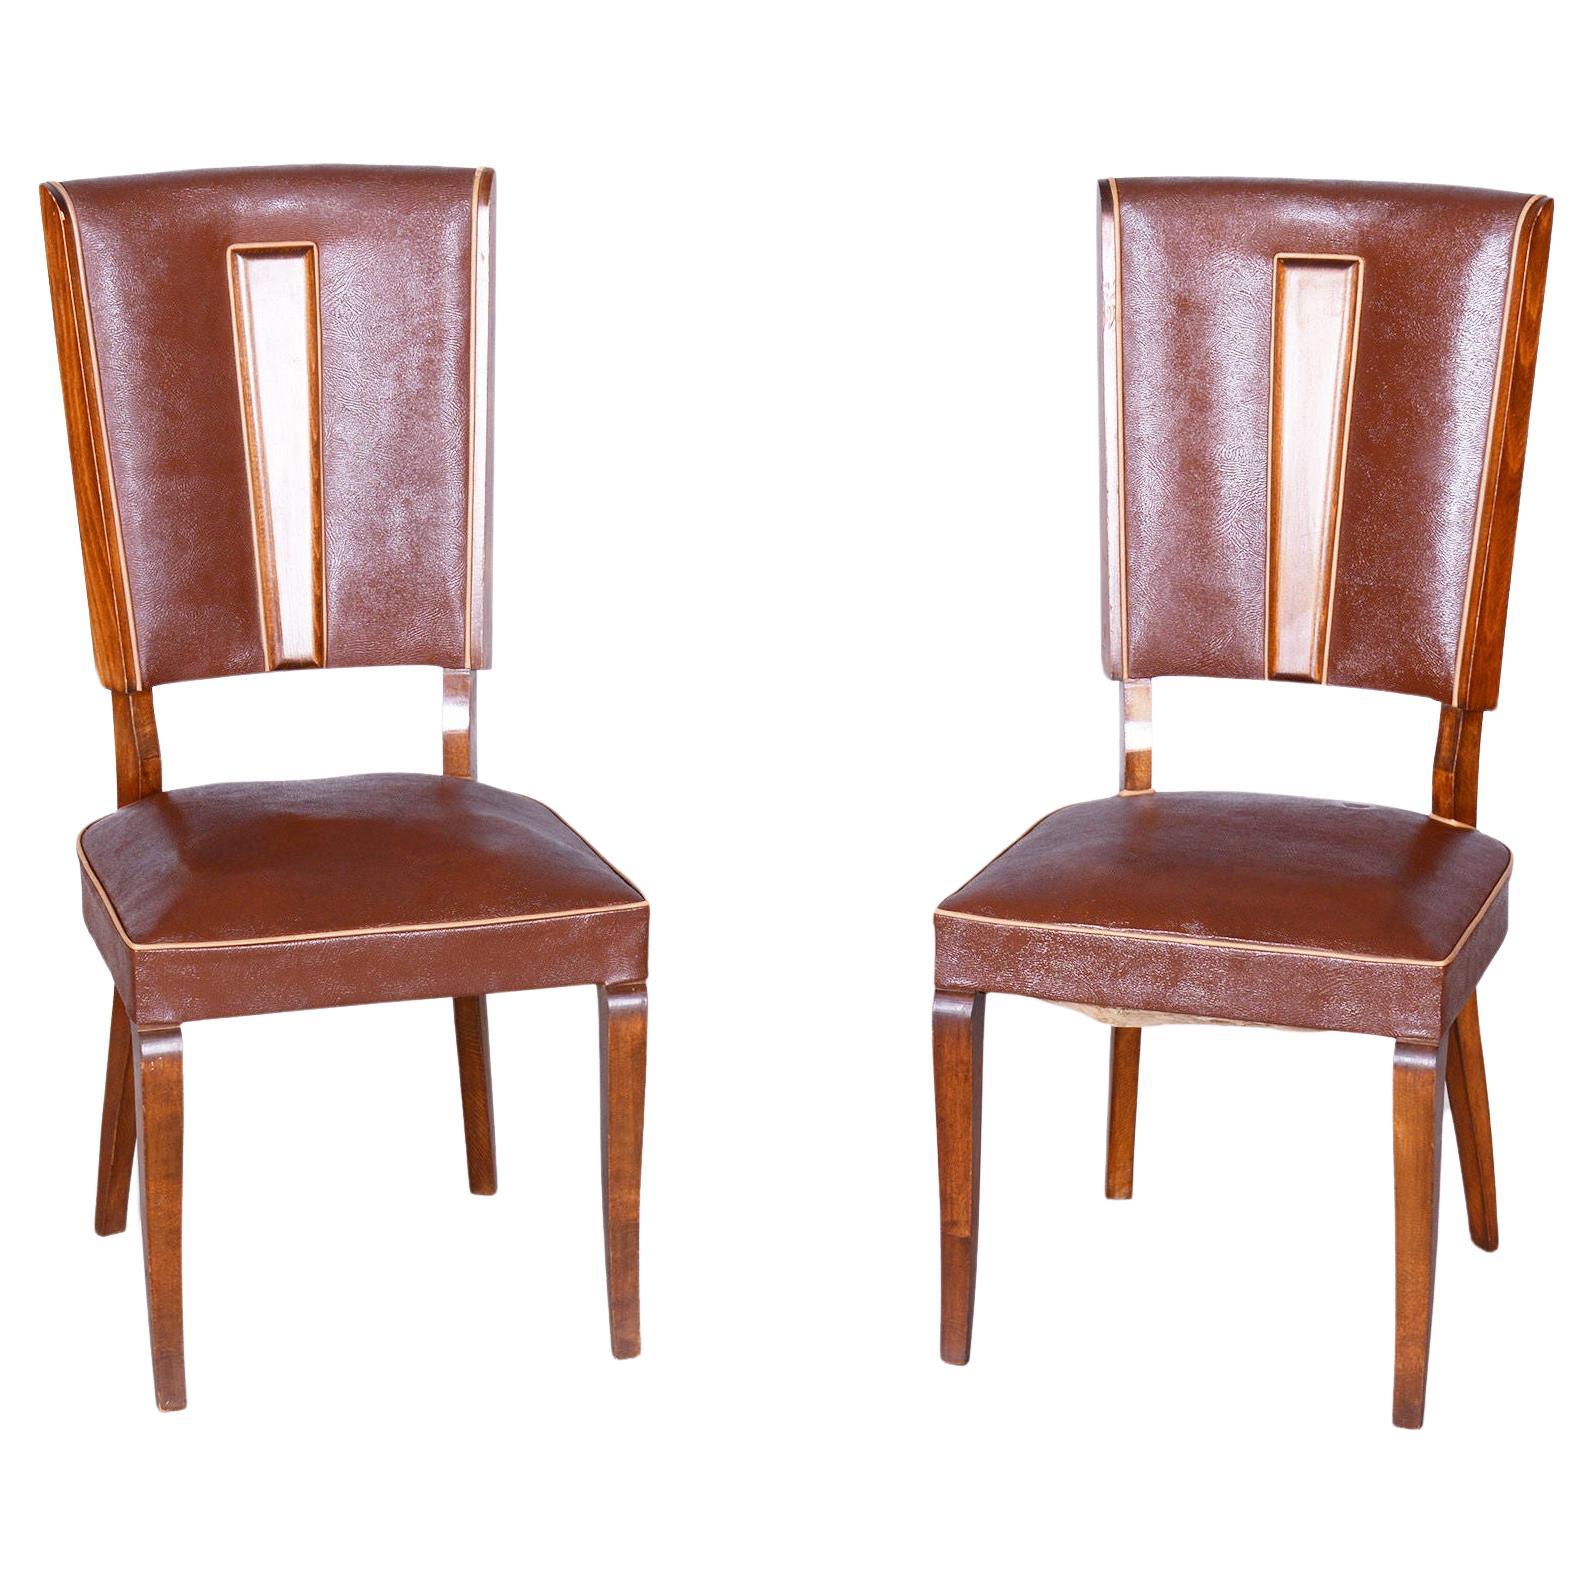 Pair of Original Art Deco Chairs, by Jules Leleu, Beech, France, 1920s For Sale